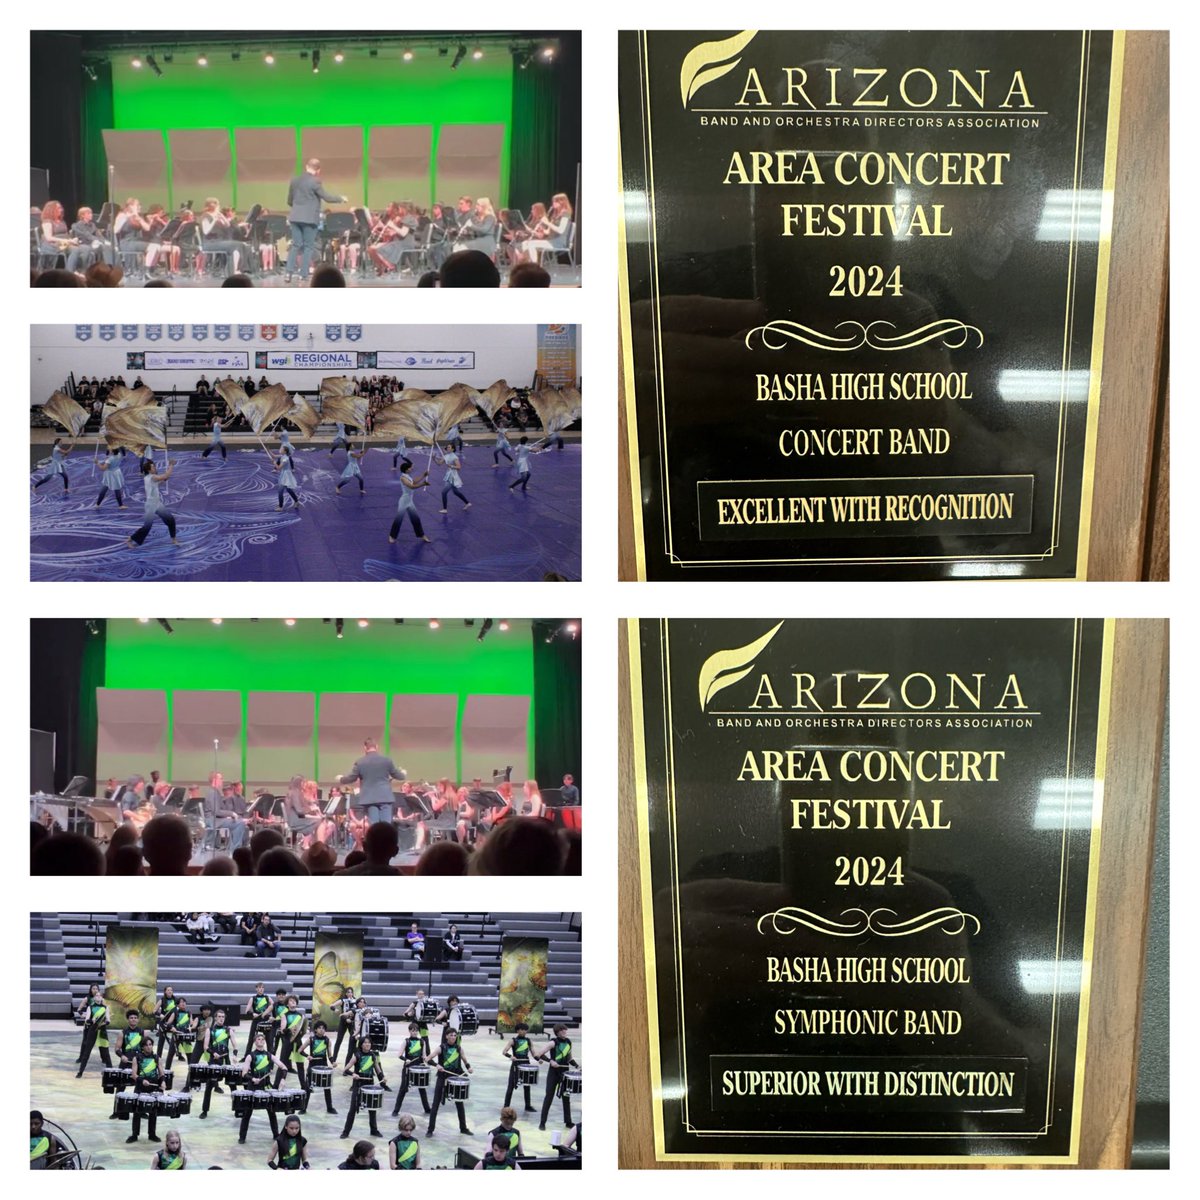 Great week of band activities this past week; ABODA area concert festival (Excellent w/ Recognition for concert band & Superior w/ Distinction for symphonic band), followed by a 6th place finish by winter guard and 1st place for indoor percussion.